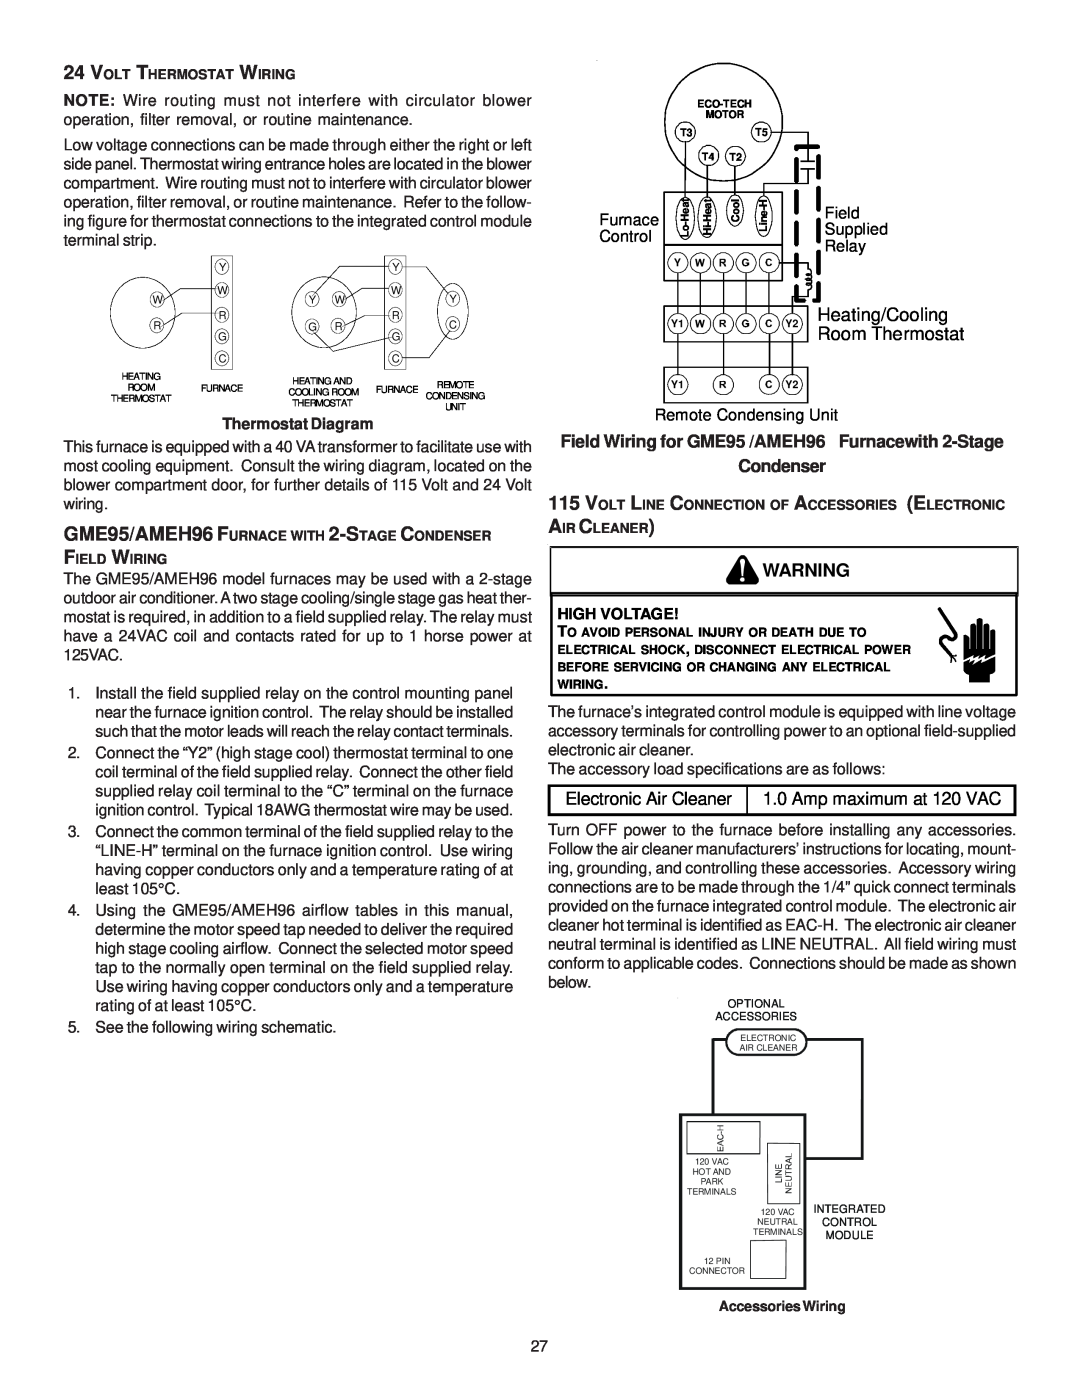 Goodman Mfg GAS-FIRED WARM AIR FURNACE Heating/Cooling, Room Thermostat, Condenser, Thermostat Diagram, Furnace, Supplied 